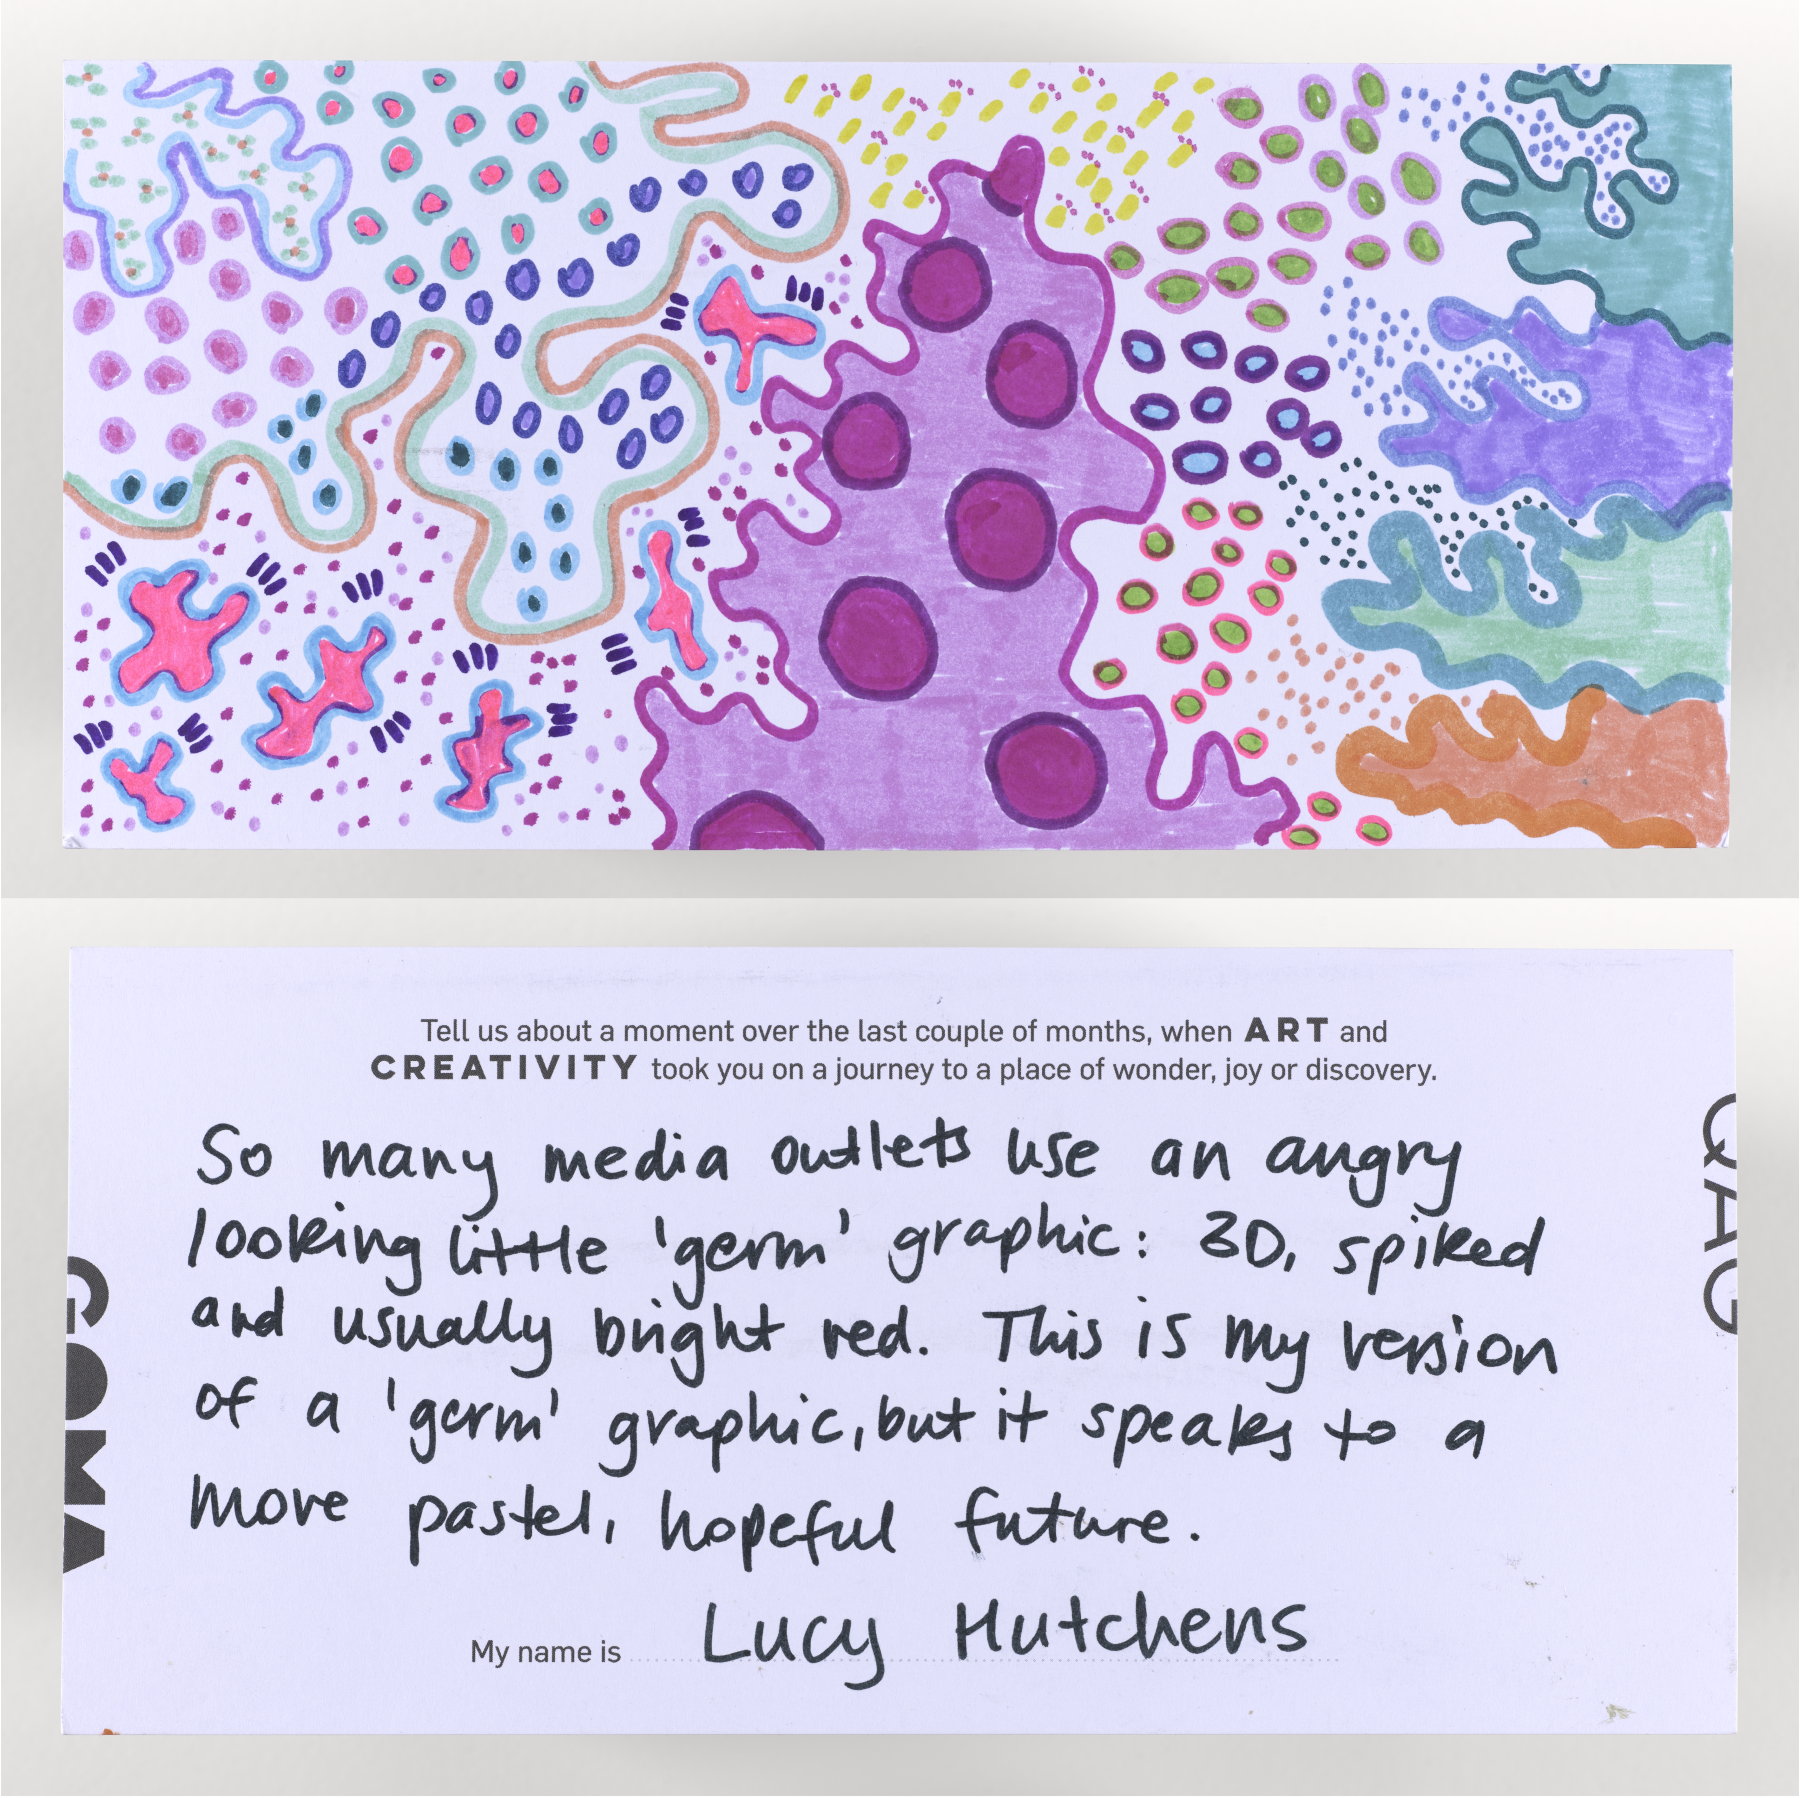 Generated image of the artwork: Lucy Hutchens